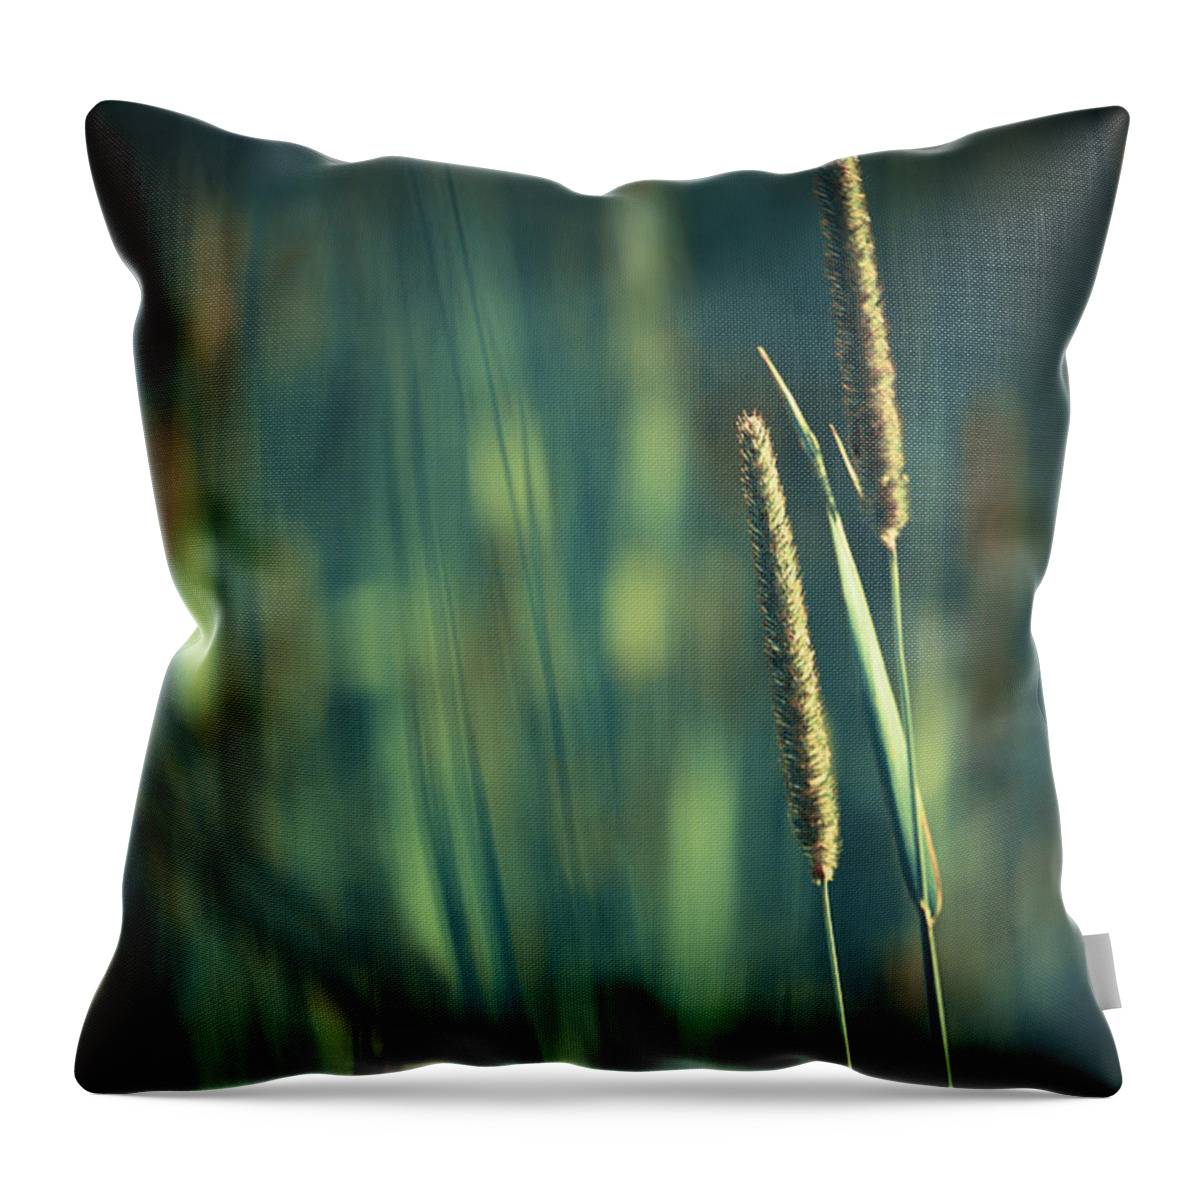 Green Photographs Throw Pillow featuring the photograph Night Whispers by Aimelle Ml